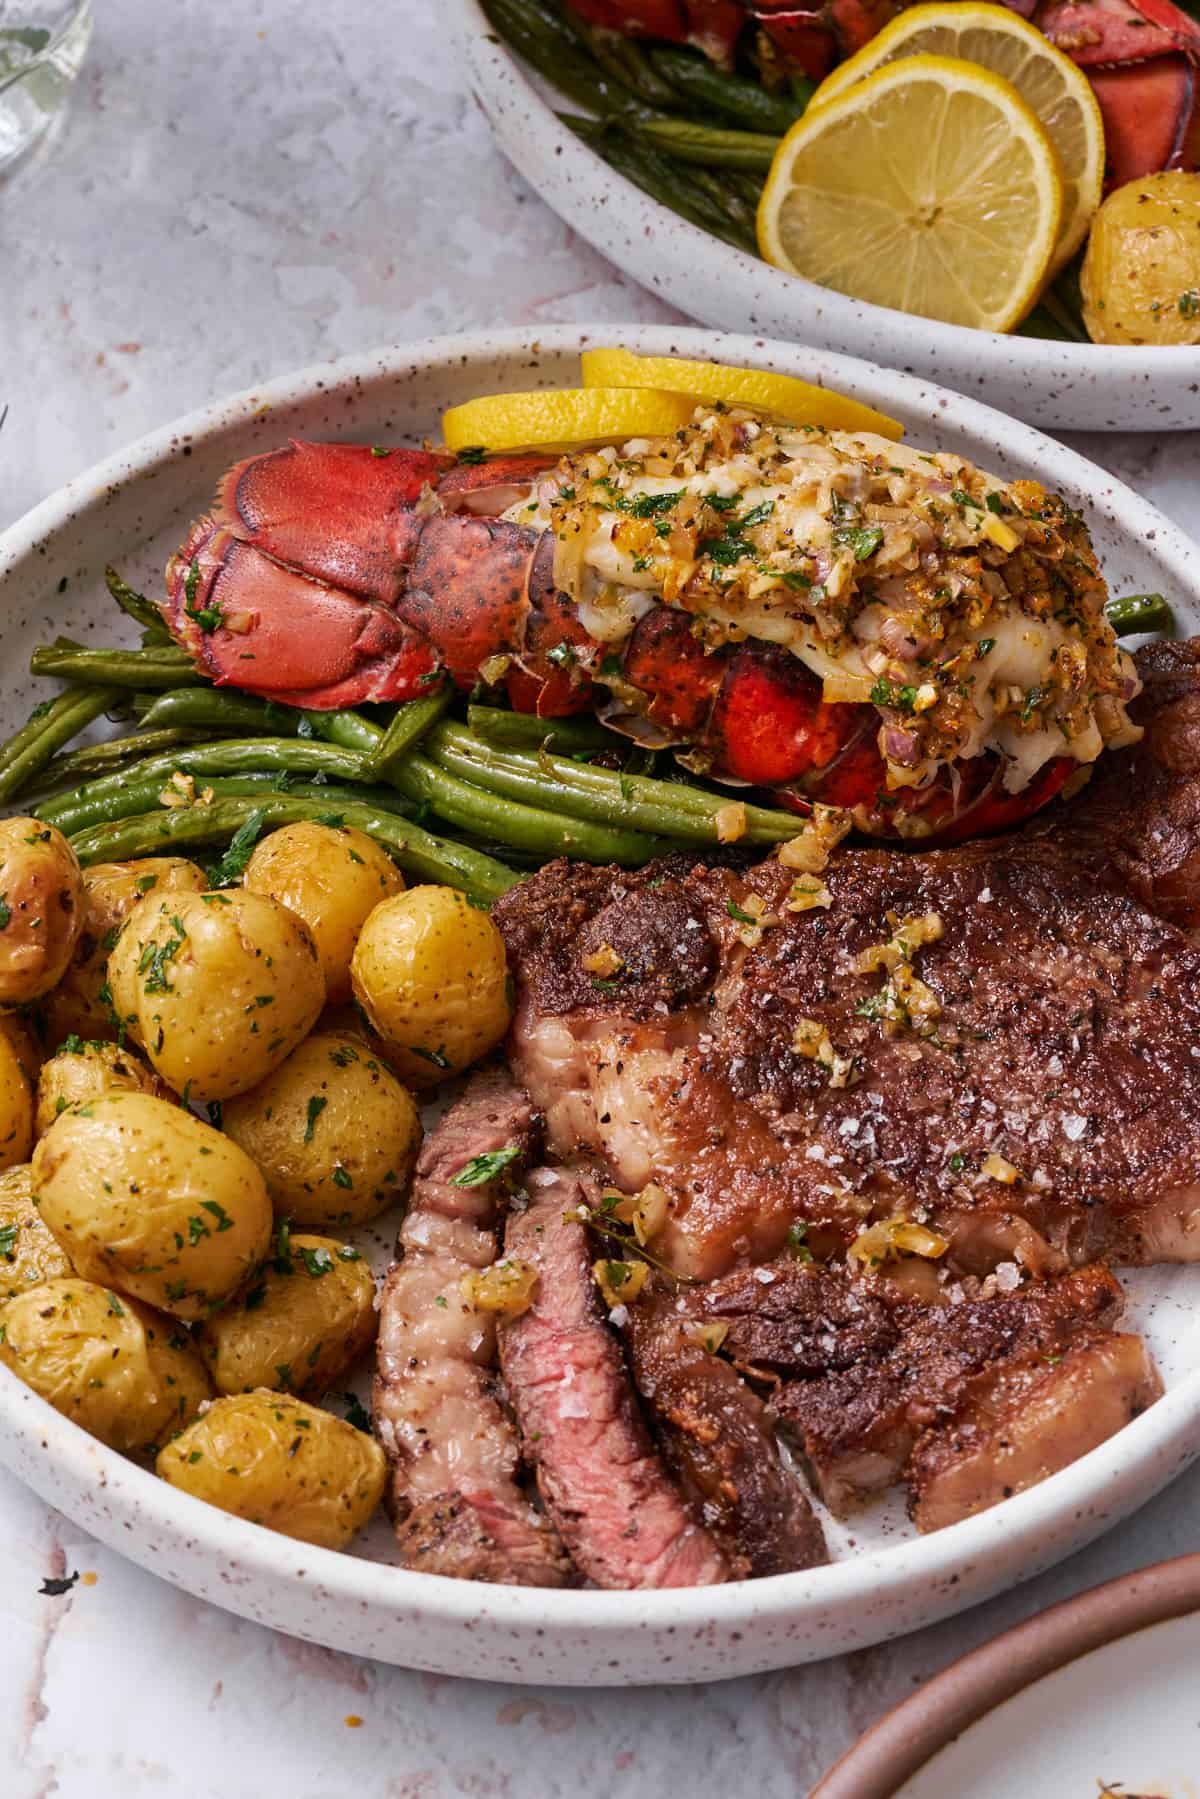 45 degree shot of a plate with a medium rare ribeye, green beans, roasted baby potatoes, and a cooked lobster tail with herbs and butter.